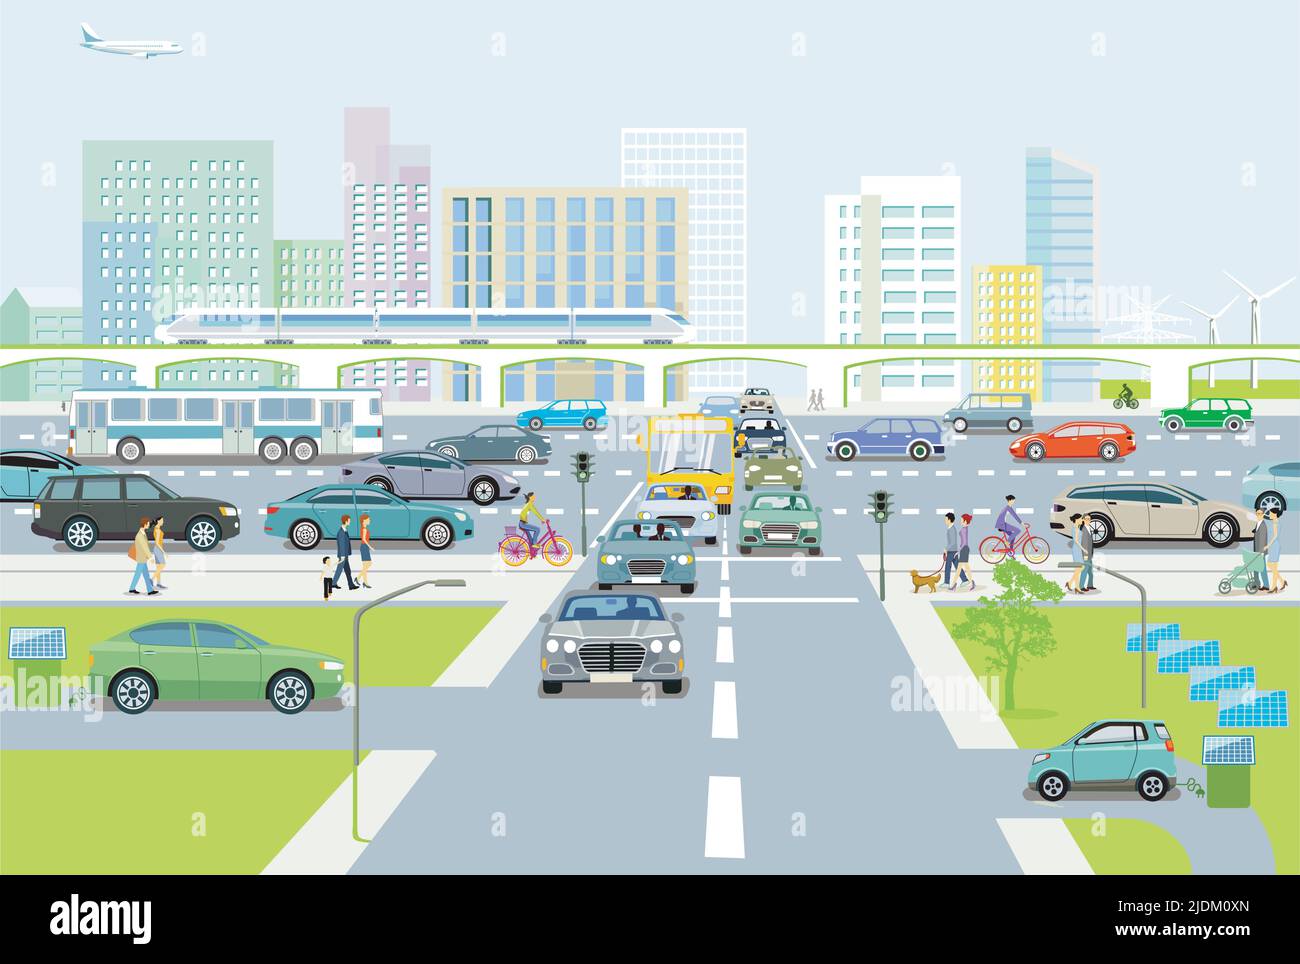 People and car traffic in the city illustration Stock Vector